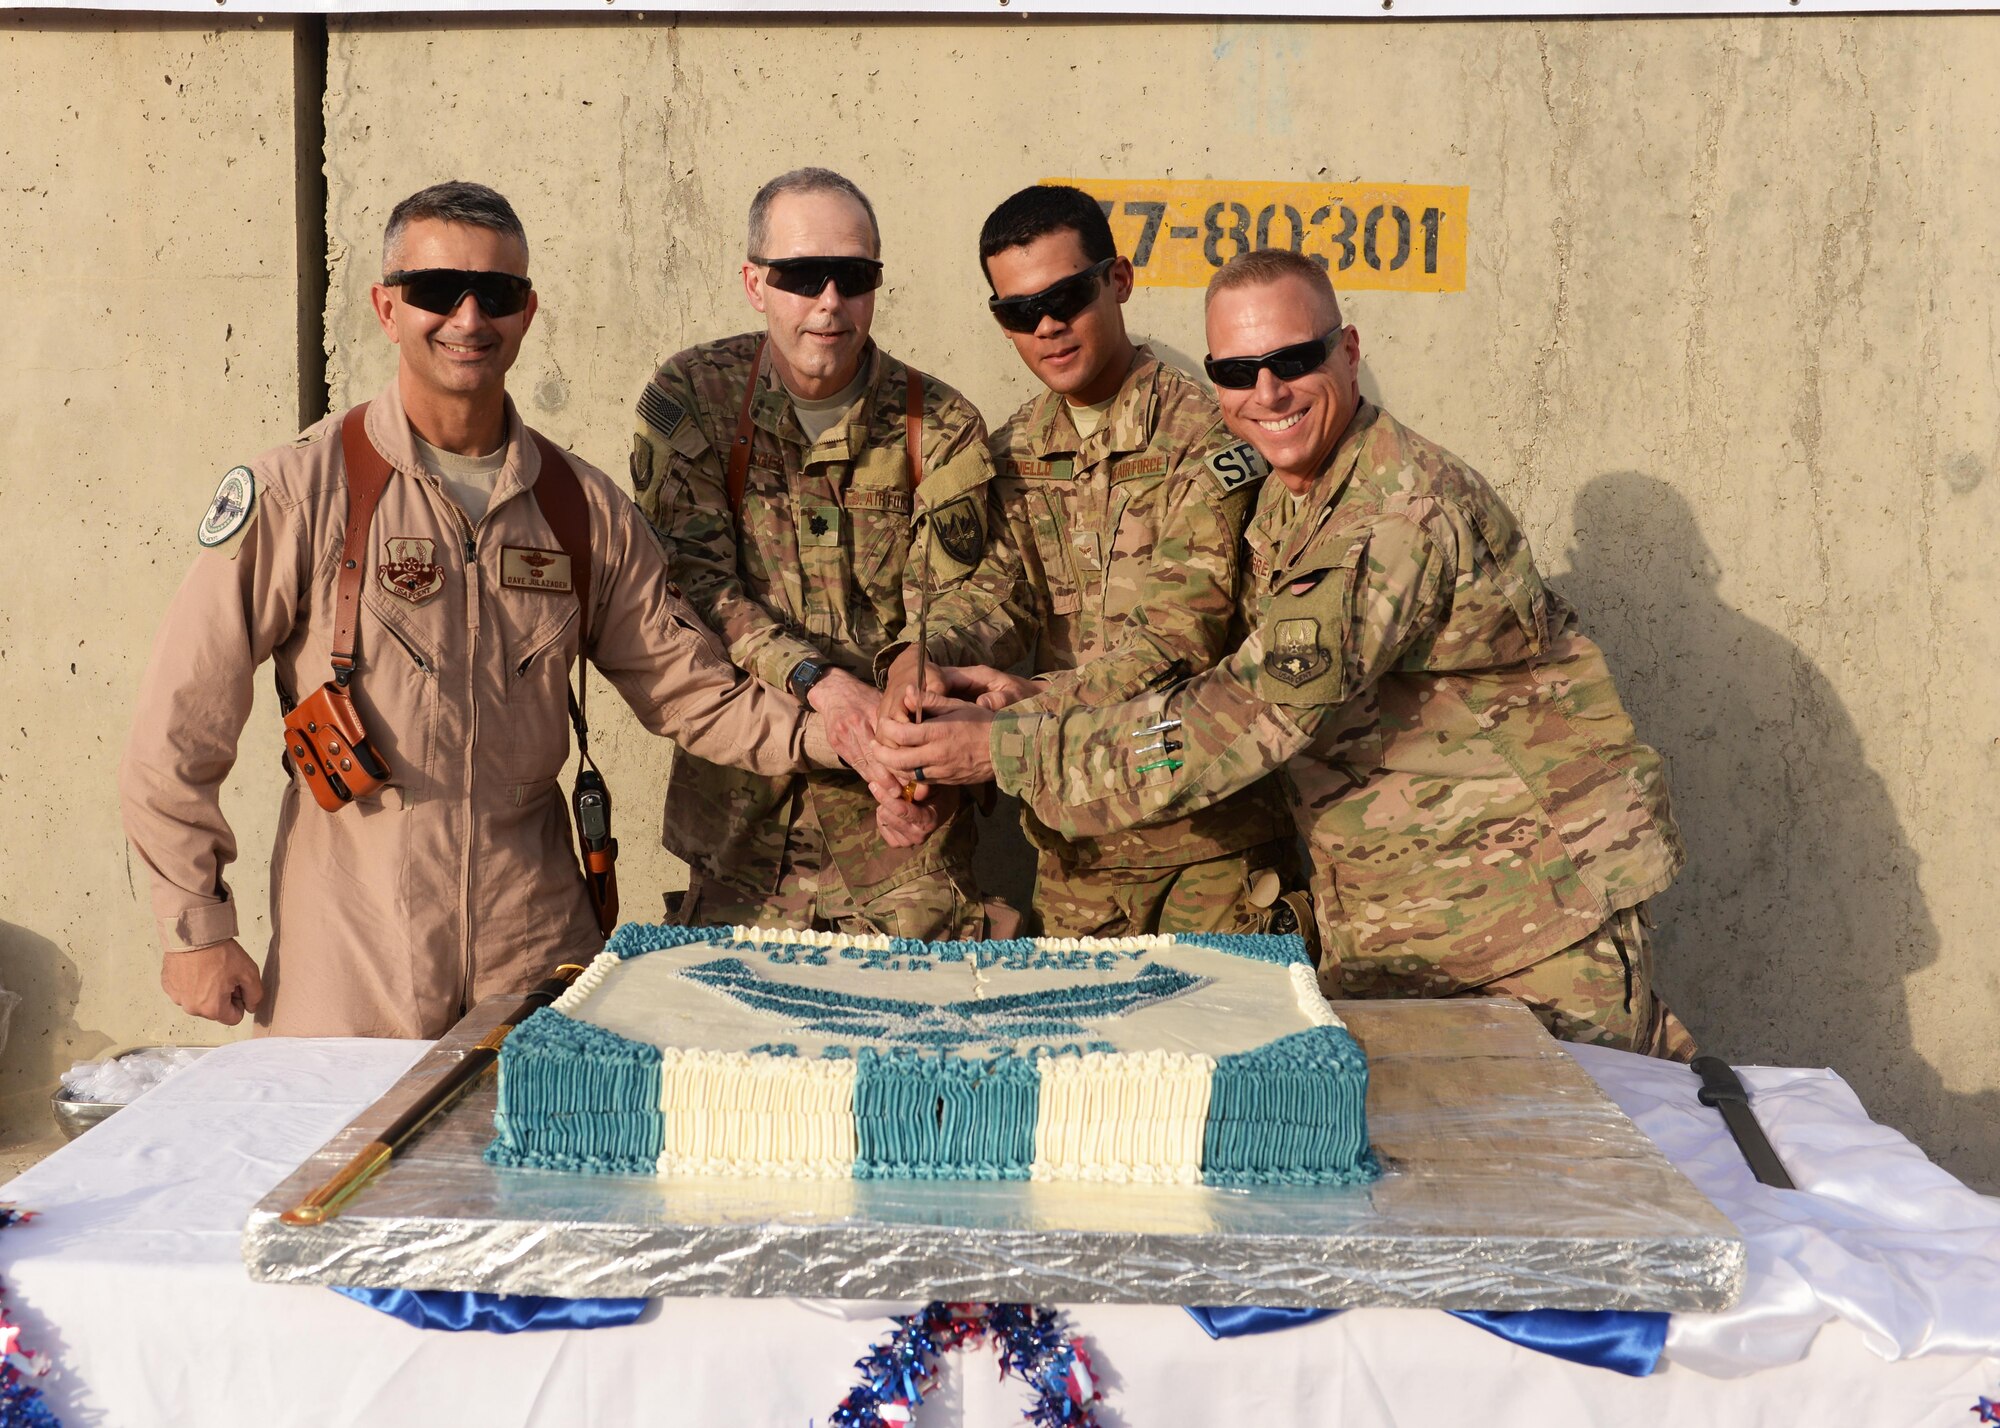 From left to right, U.S. Air Force Brig Gen. David Julazadeh, 455th Air Expeditionary Wing commander, Lt. Col. Ray Krueger 455th Expeditionary Medical Group chief of medicine, Airman 1st Class Wilmer Puello, 455 Expeditionary Security Forces Squadron FAST team member and Chief Master Sgt. Matthew Grengs, 455 AEW command chief cut a cake during the Air Force birthday celebration Sept. 18, 2014, at Bagram Airfield, Afghanistan. The cake cutting is an Air Force tradition in which the oldest and youngest Airmen cut the cake with the base commander and wing command chief. (U.S. Air Force photo by Senior Airman Cierra Presentado/Released)